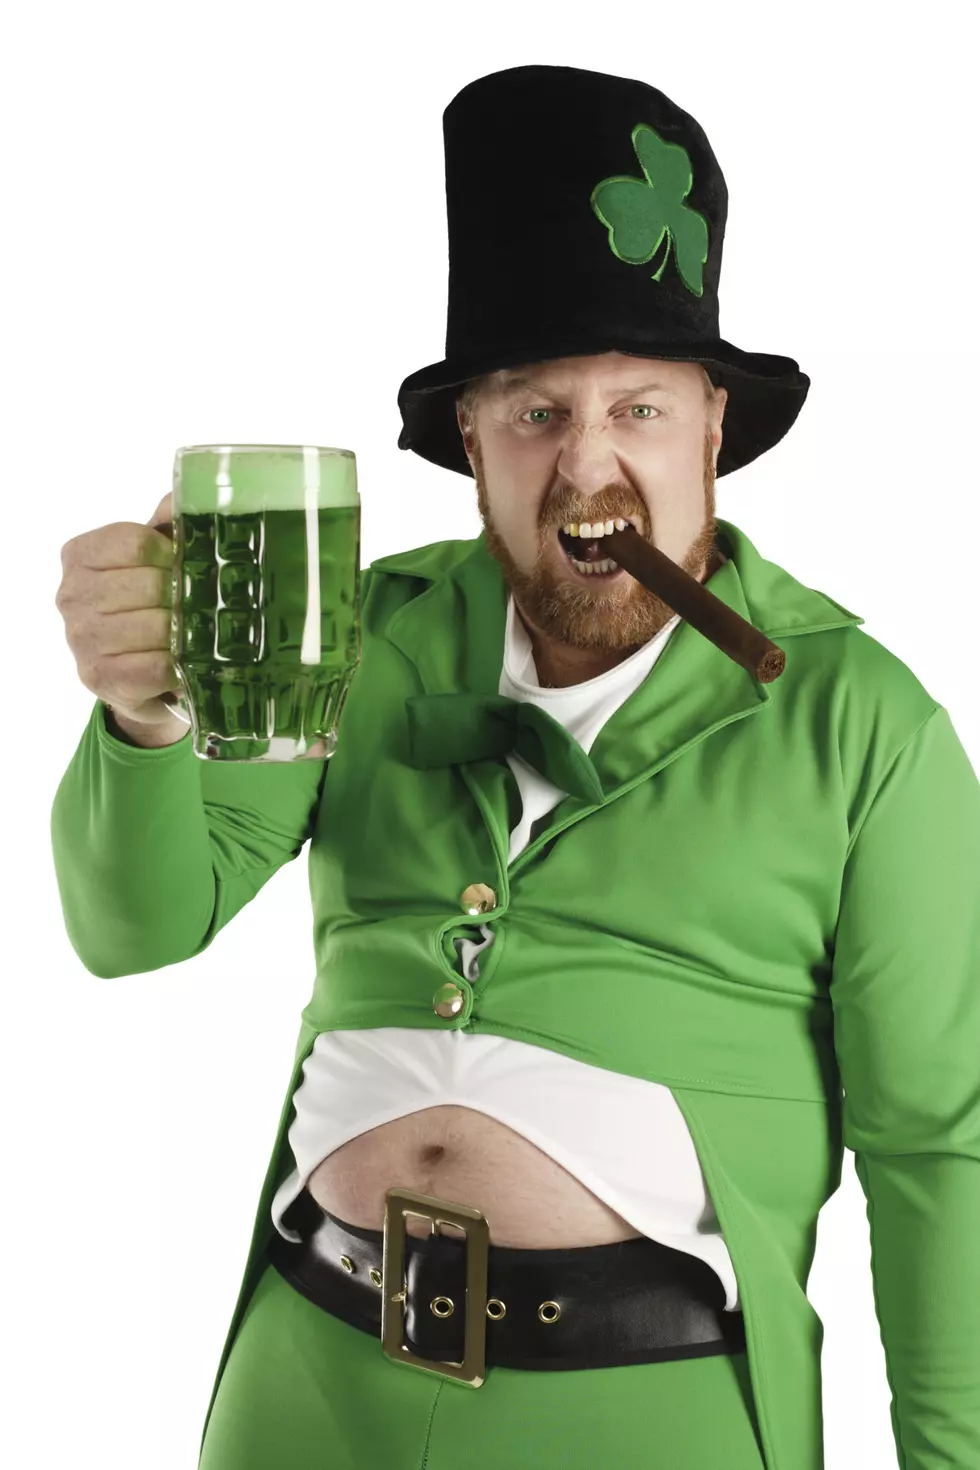 A St. Patty’s Day Song (NSFW)